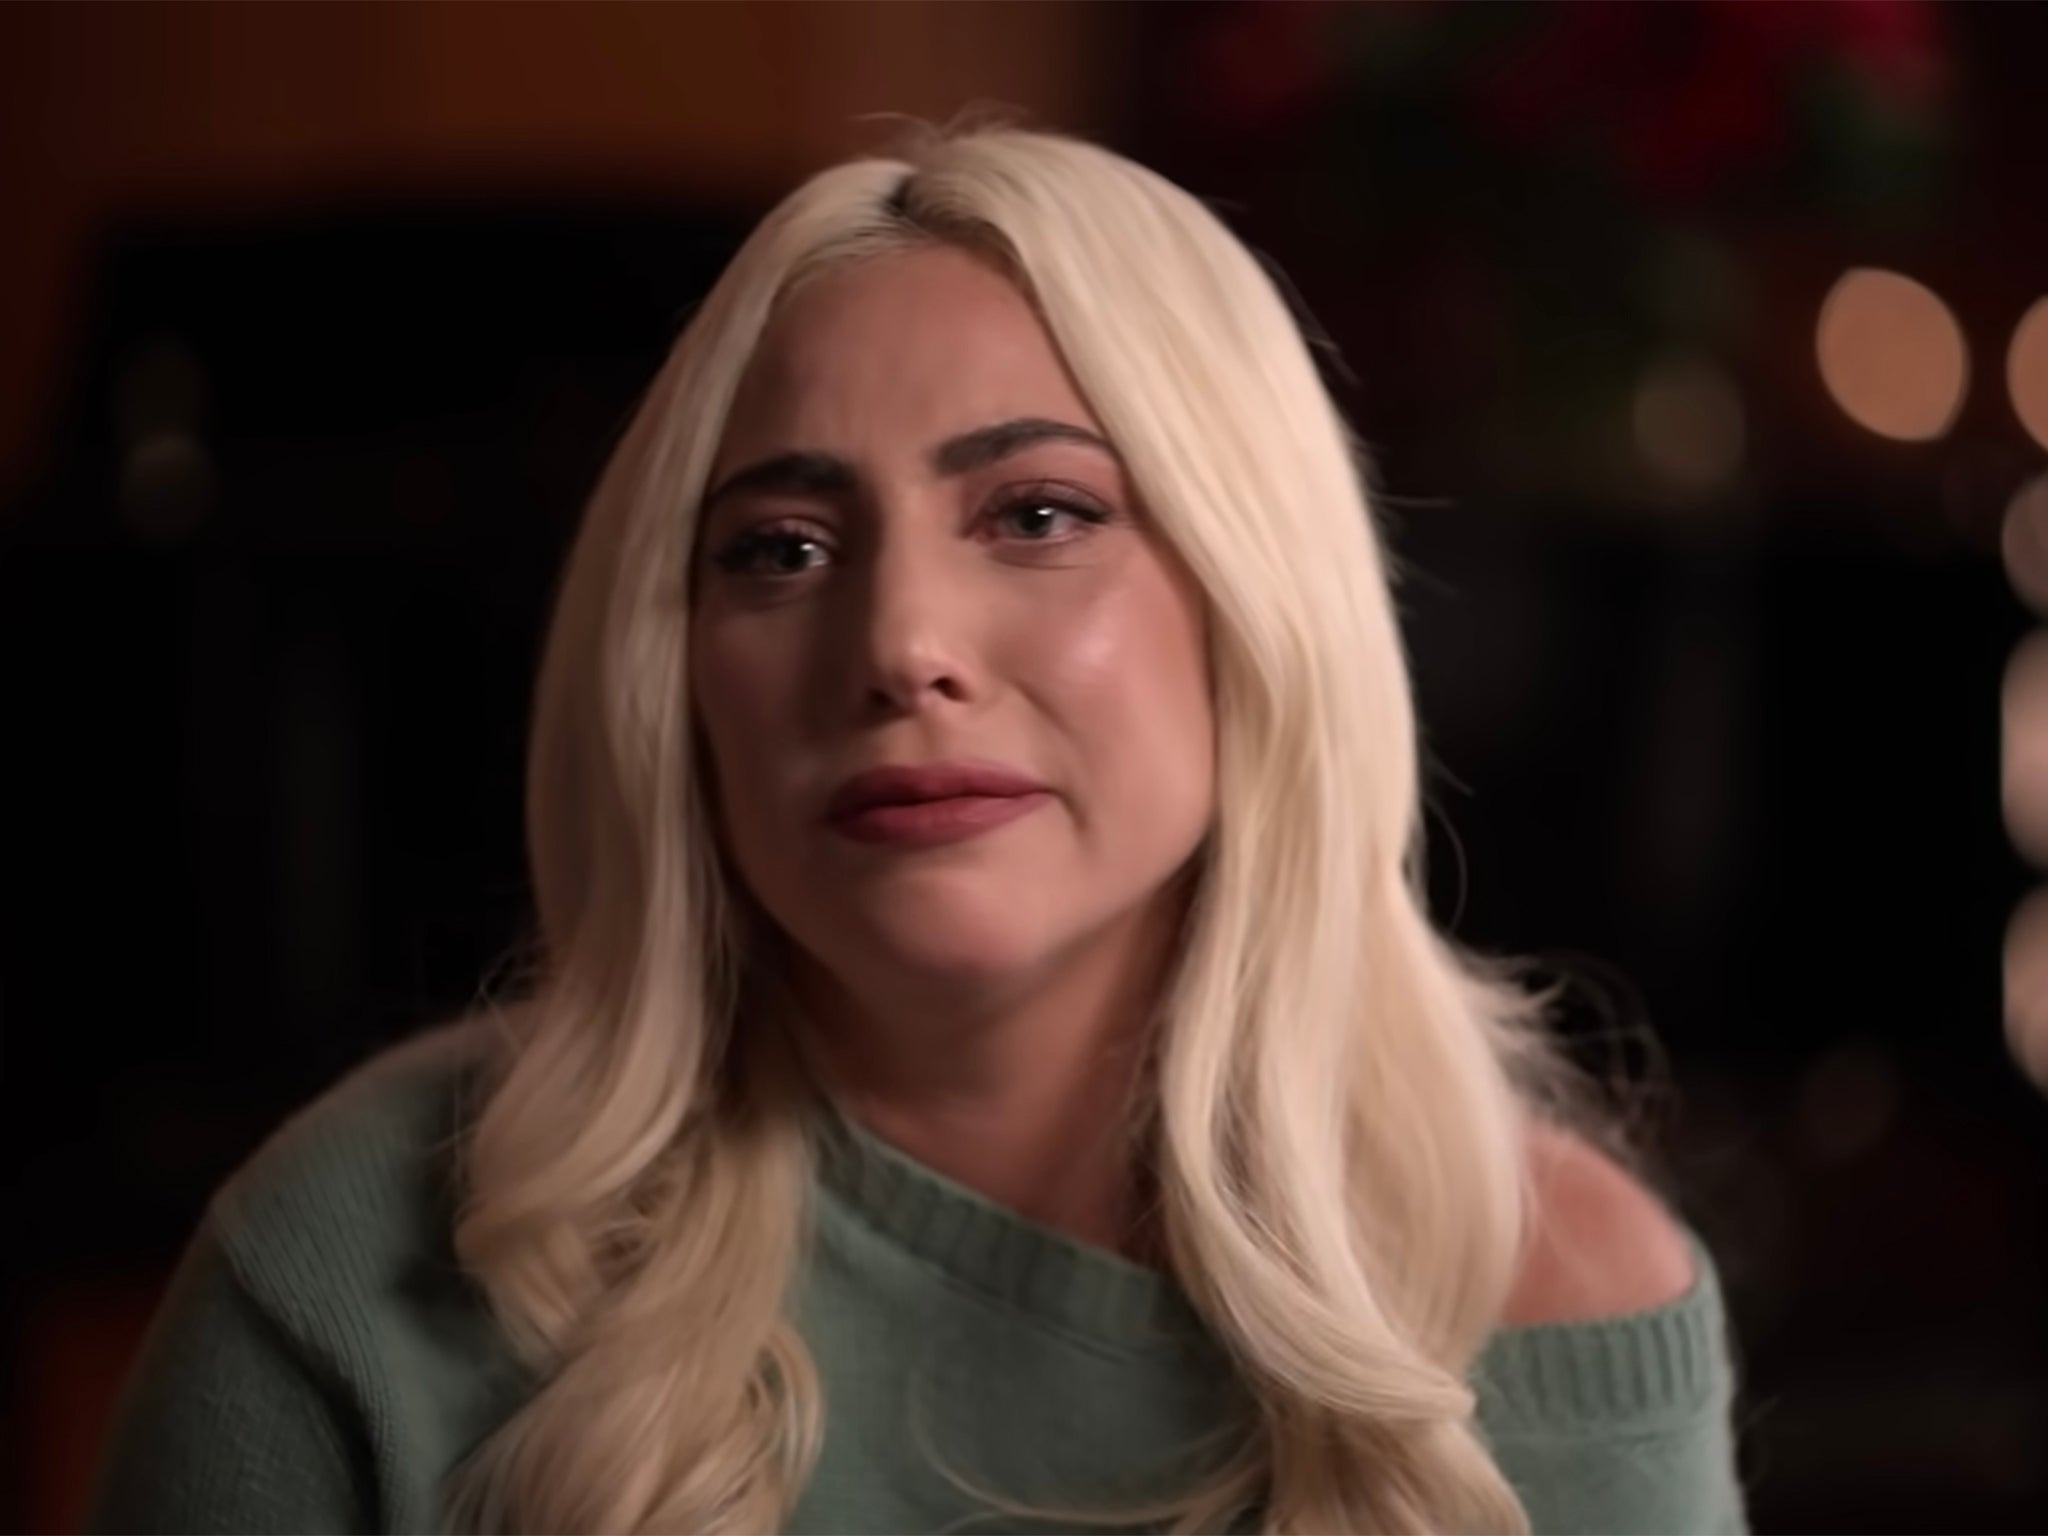 Lady Gaga breaks down in tears in Apple TV+’s The Me You Can’t See